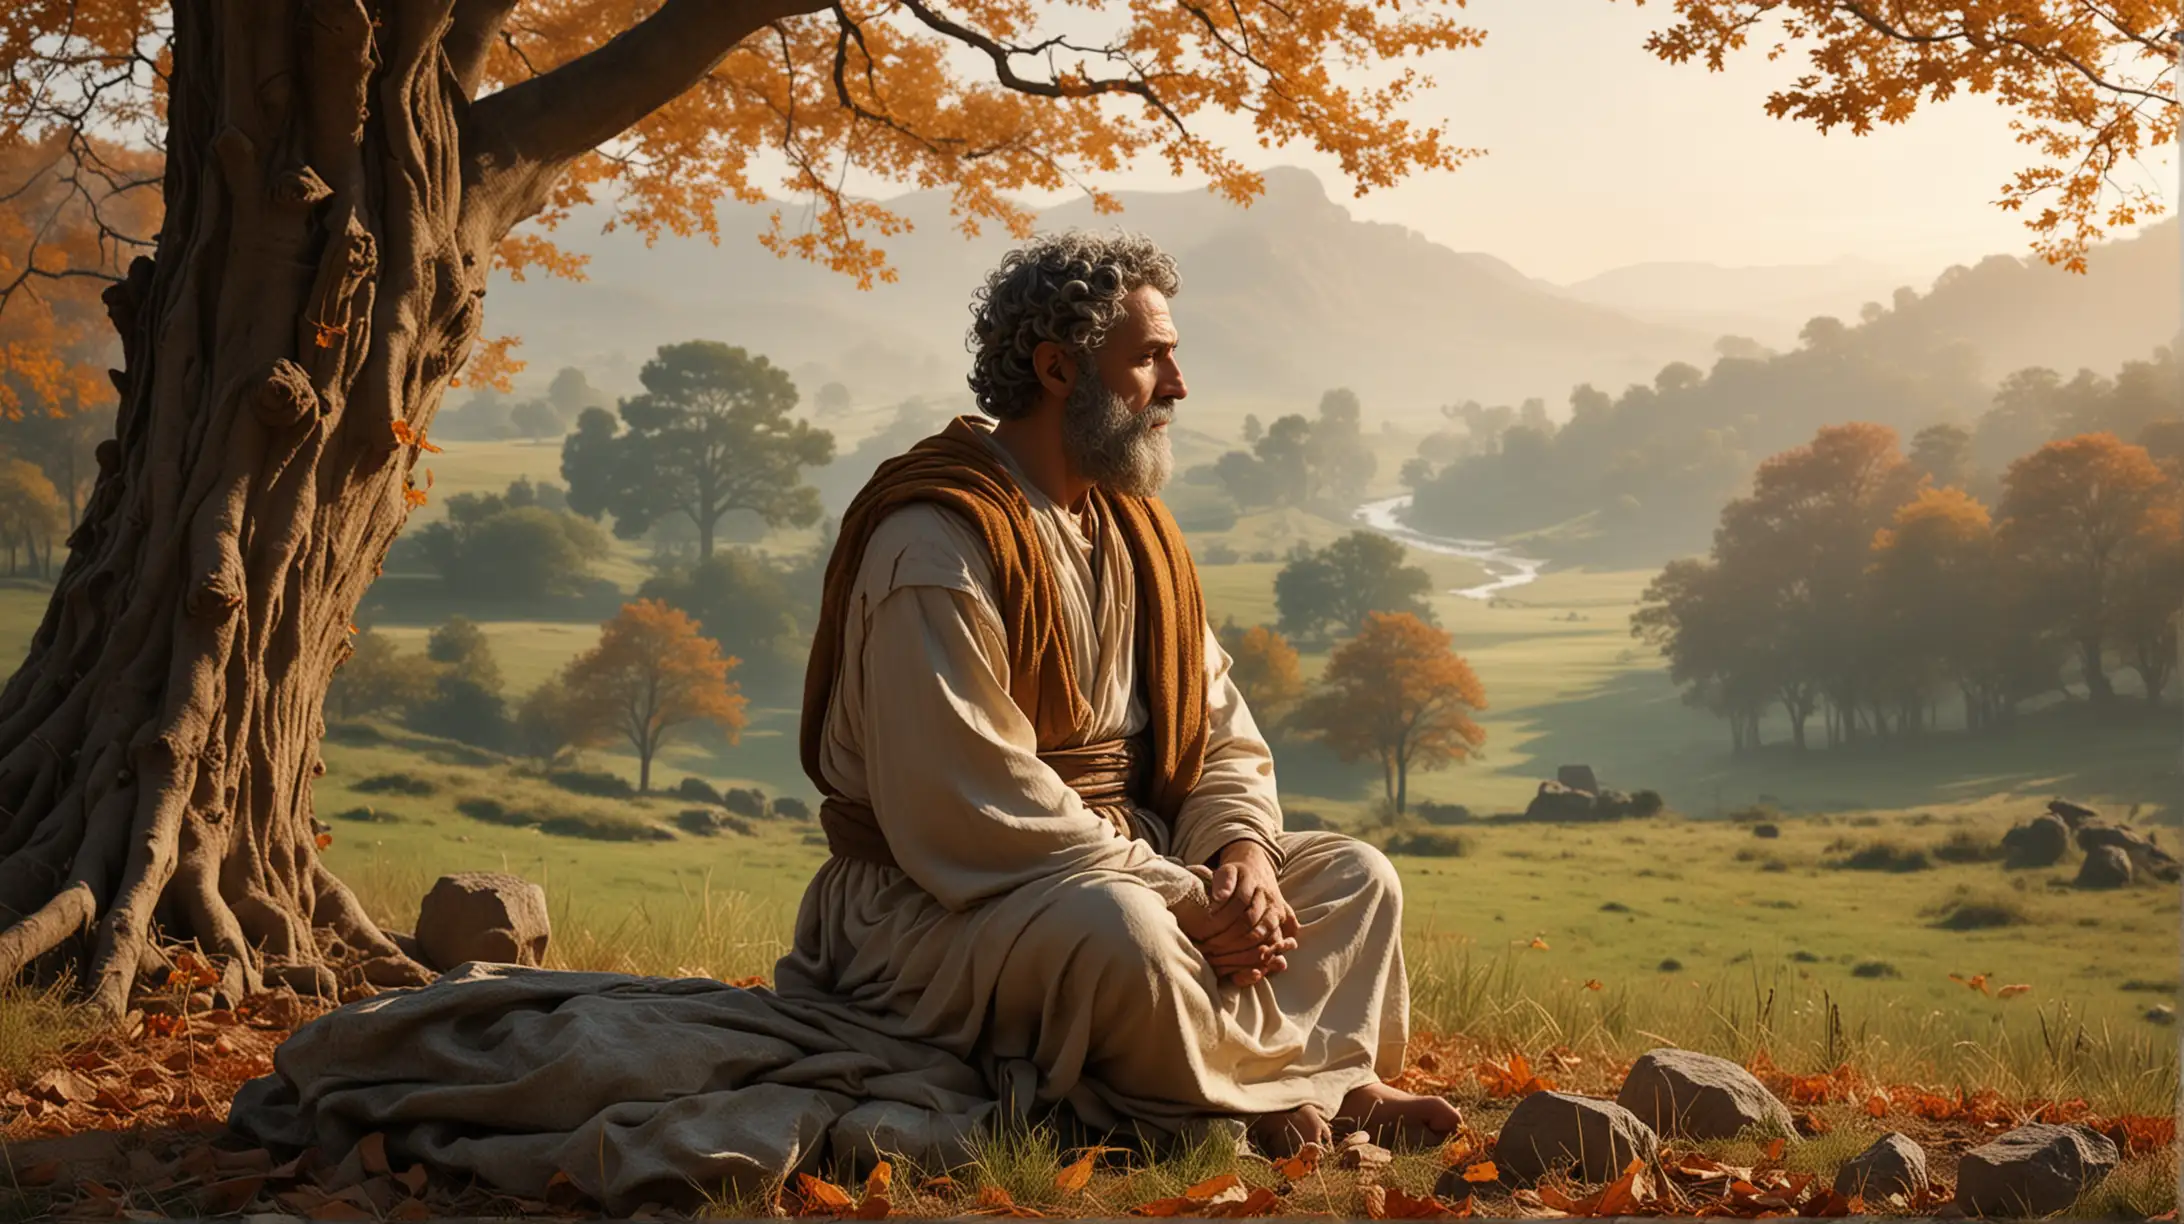 Visualize a stoic philosopher embracing the inevitability of change and transformation, depicted amidst the changing seasons of a tranquil countryside.

Image Description: In a tranquil countryside setting, the stoic philosopher stands amidst fields of golden wheat, his gaze turned towards the horizon where the sun sets on another day. Around him, the landscape undergoes a transformation, as summer gives way to autumn and the vibrant hues of green begin to fade into shades of orange and gold. Despite the passage of time and the inevitability of change, the philosopher remains steadfast and resolute, finding beauty and meaning in the cyclical nature of life's journey. With a sense of calm acceptance, he embraces the changing seasons, knowing that each transition brings new opportunities for growth and renewal.